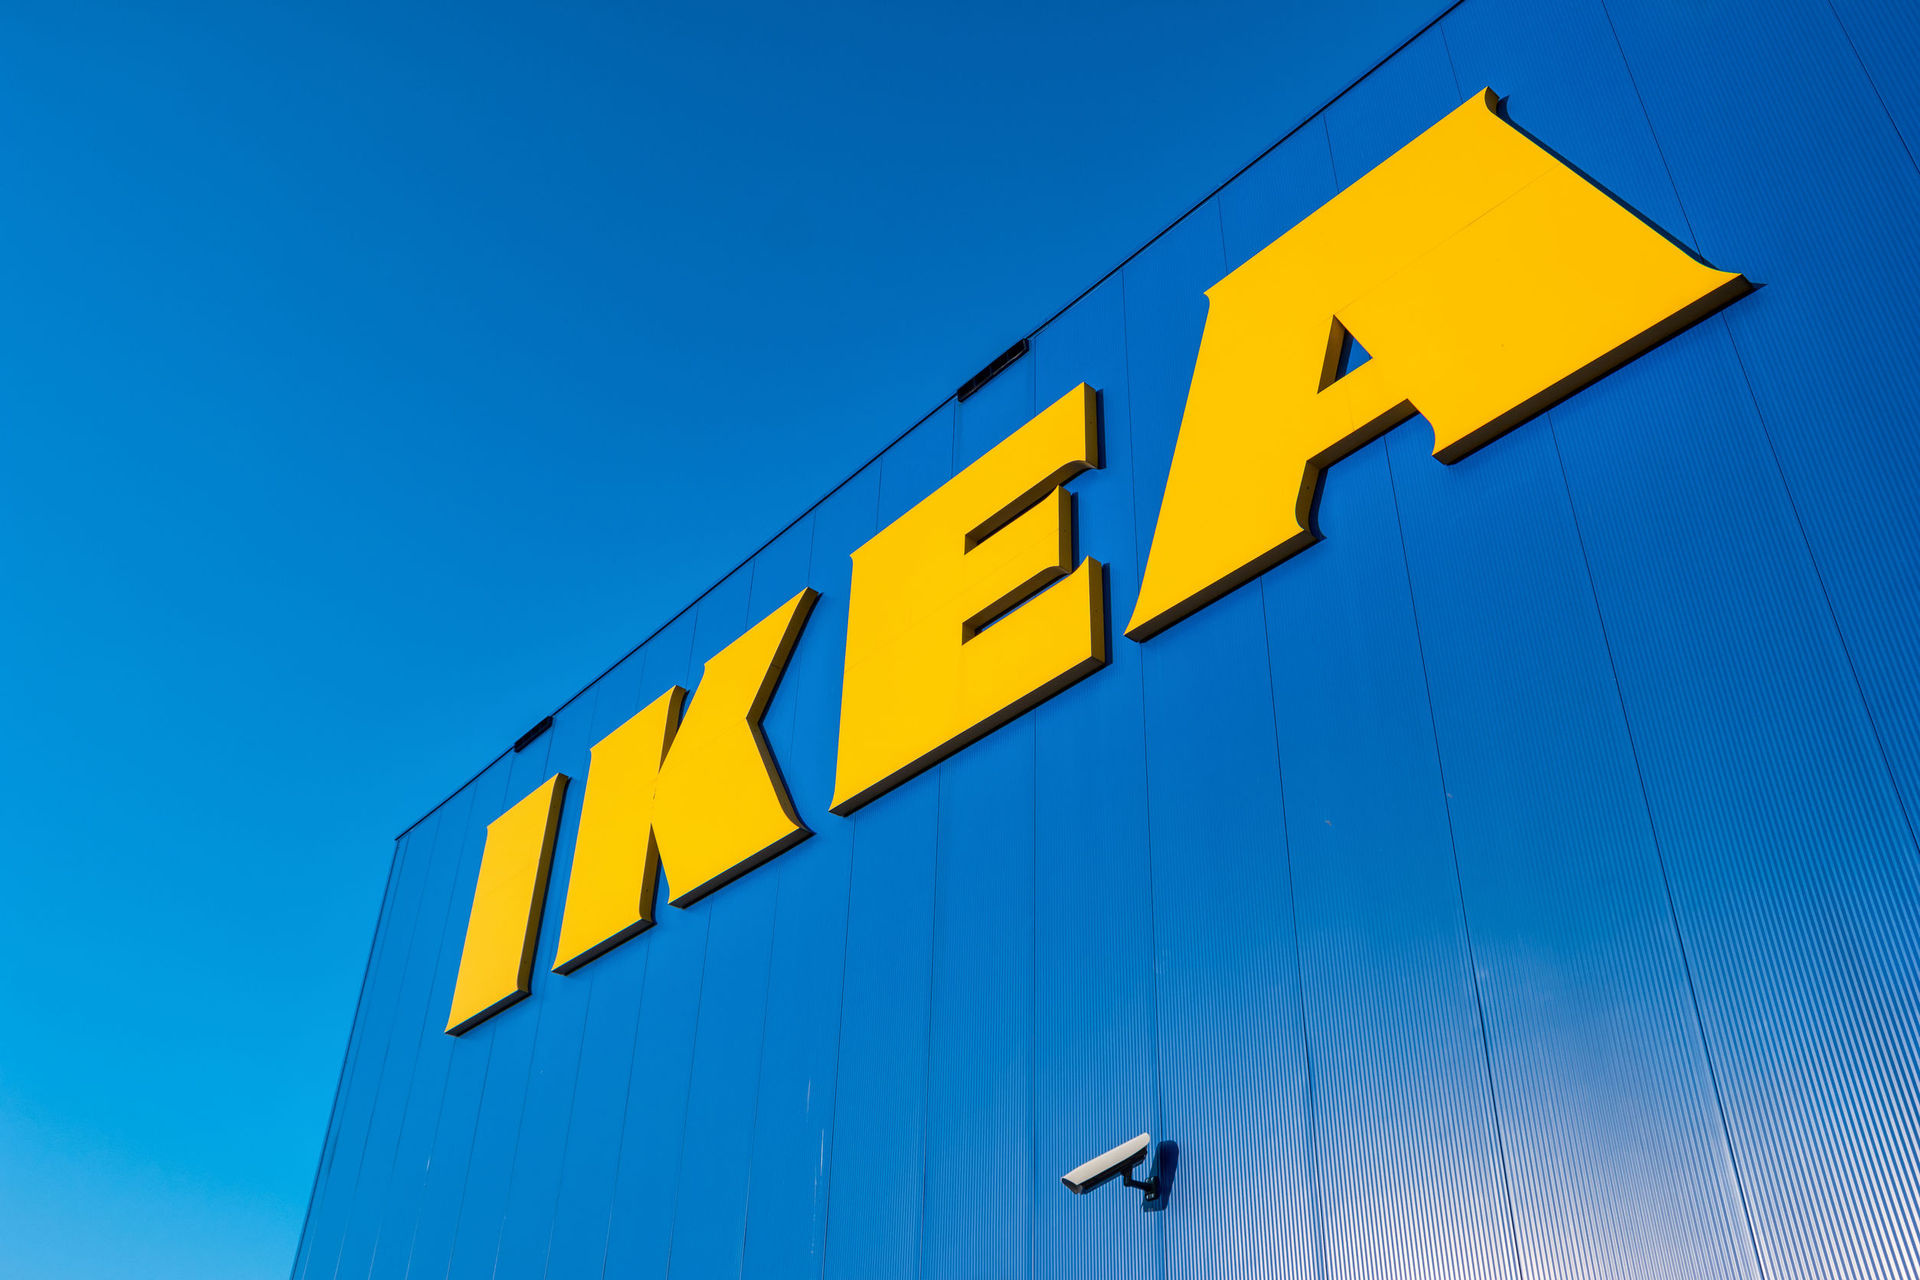 Ikea: The company that designs and sells ready-to-assemble furniture, appliances, and home accessories. 1920x1280 HD Wallpaper.